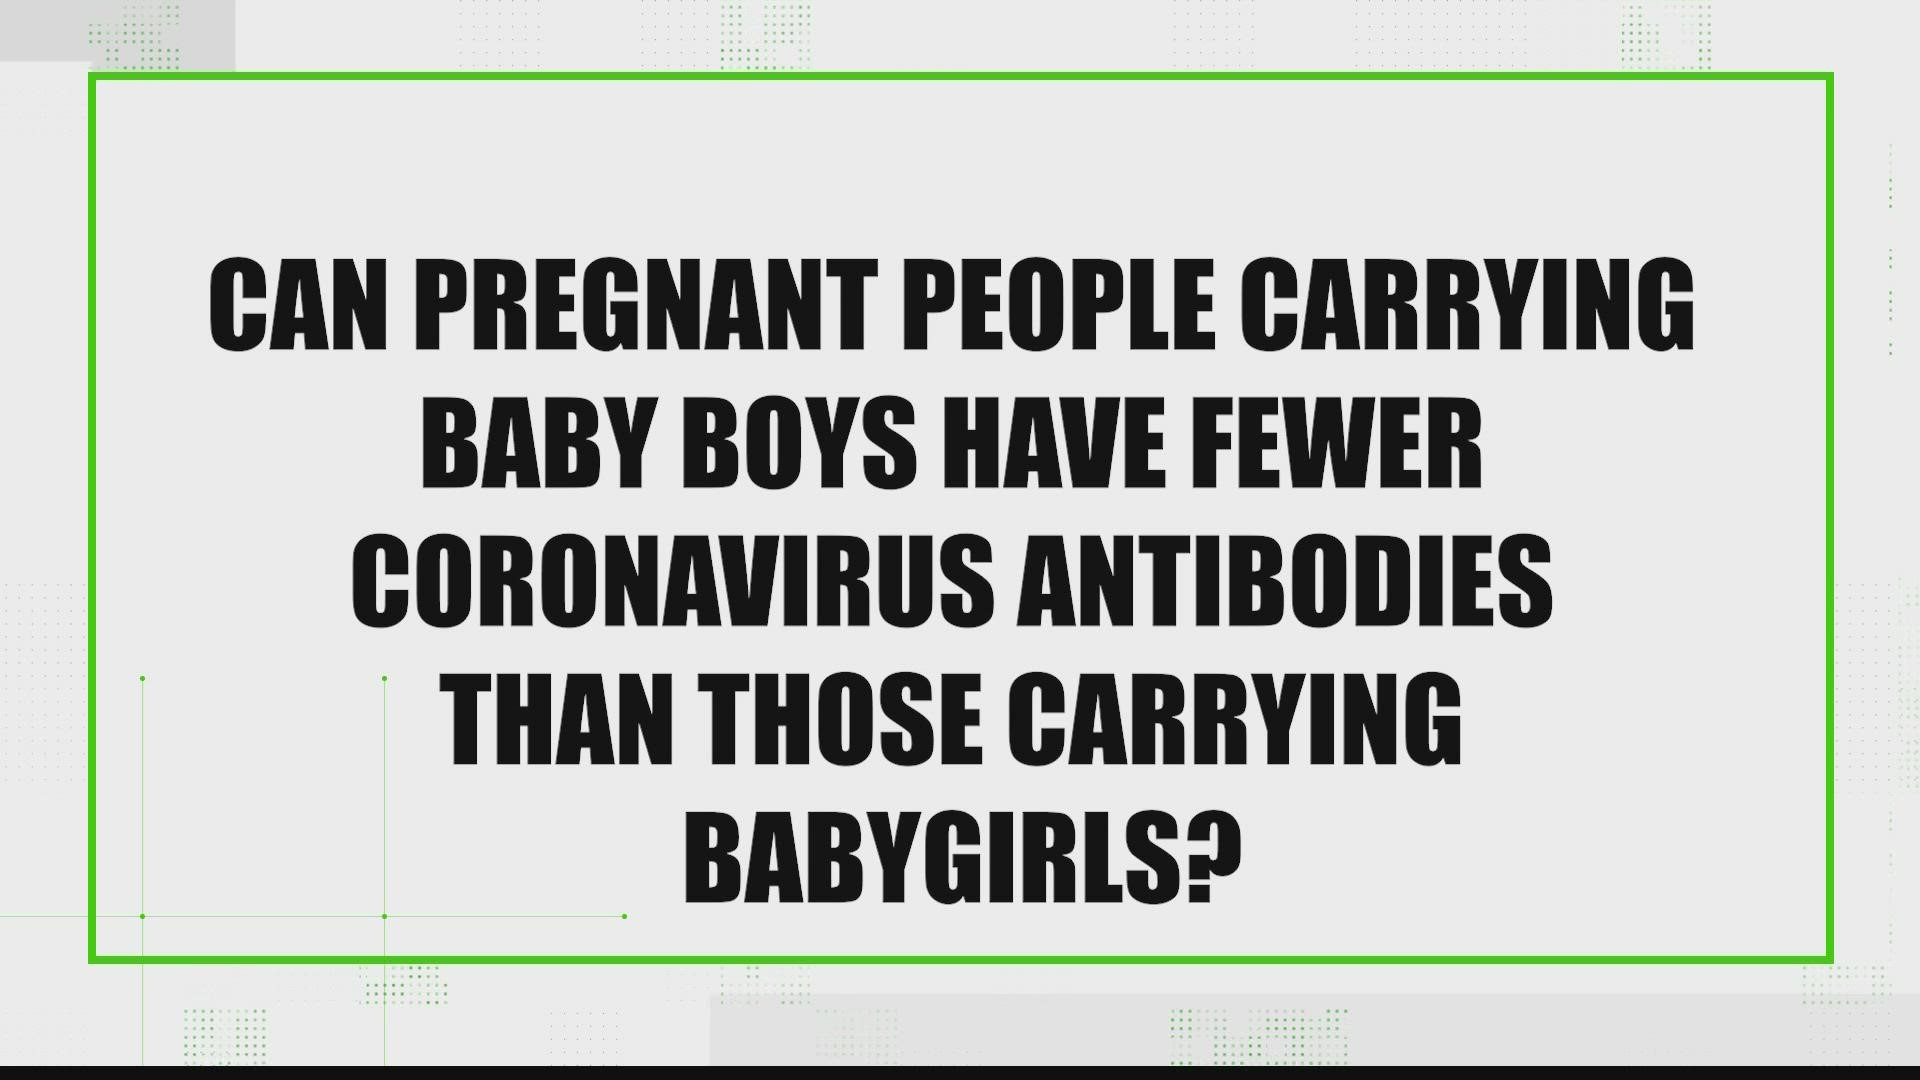 A small study was conducted with a sample of 38 people infected with COVID-19. One half carried boys, the other half carried girls.